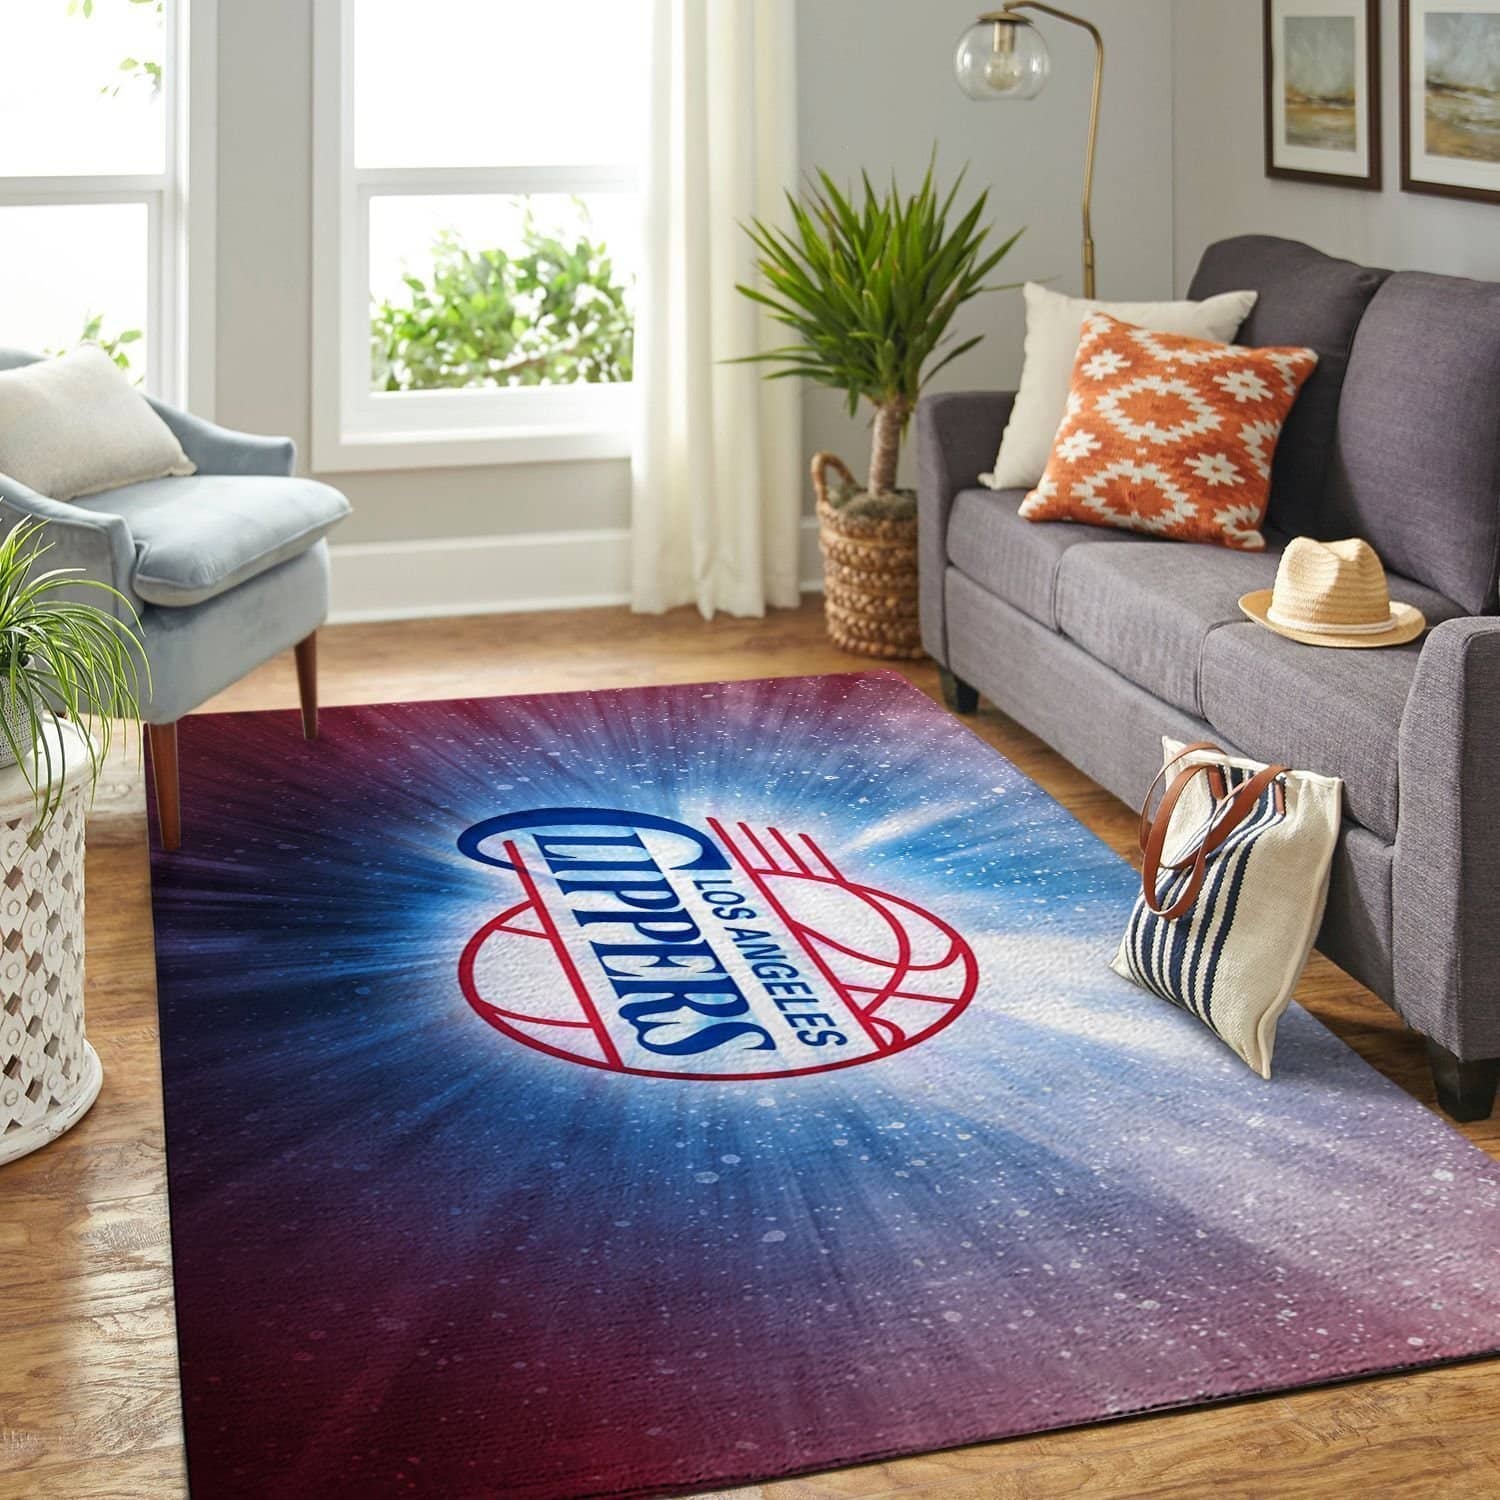 Amazon Los Angeles Clippers Living Room Area No3552 Rug